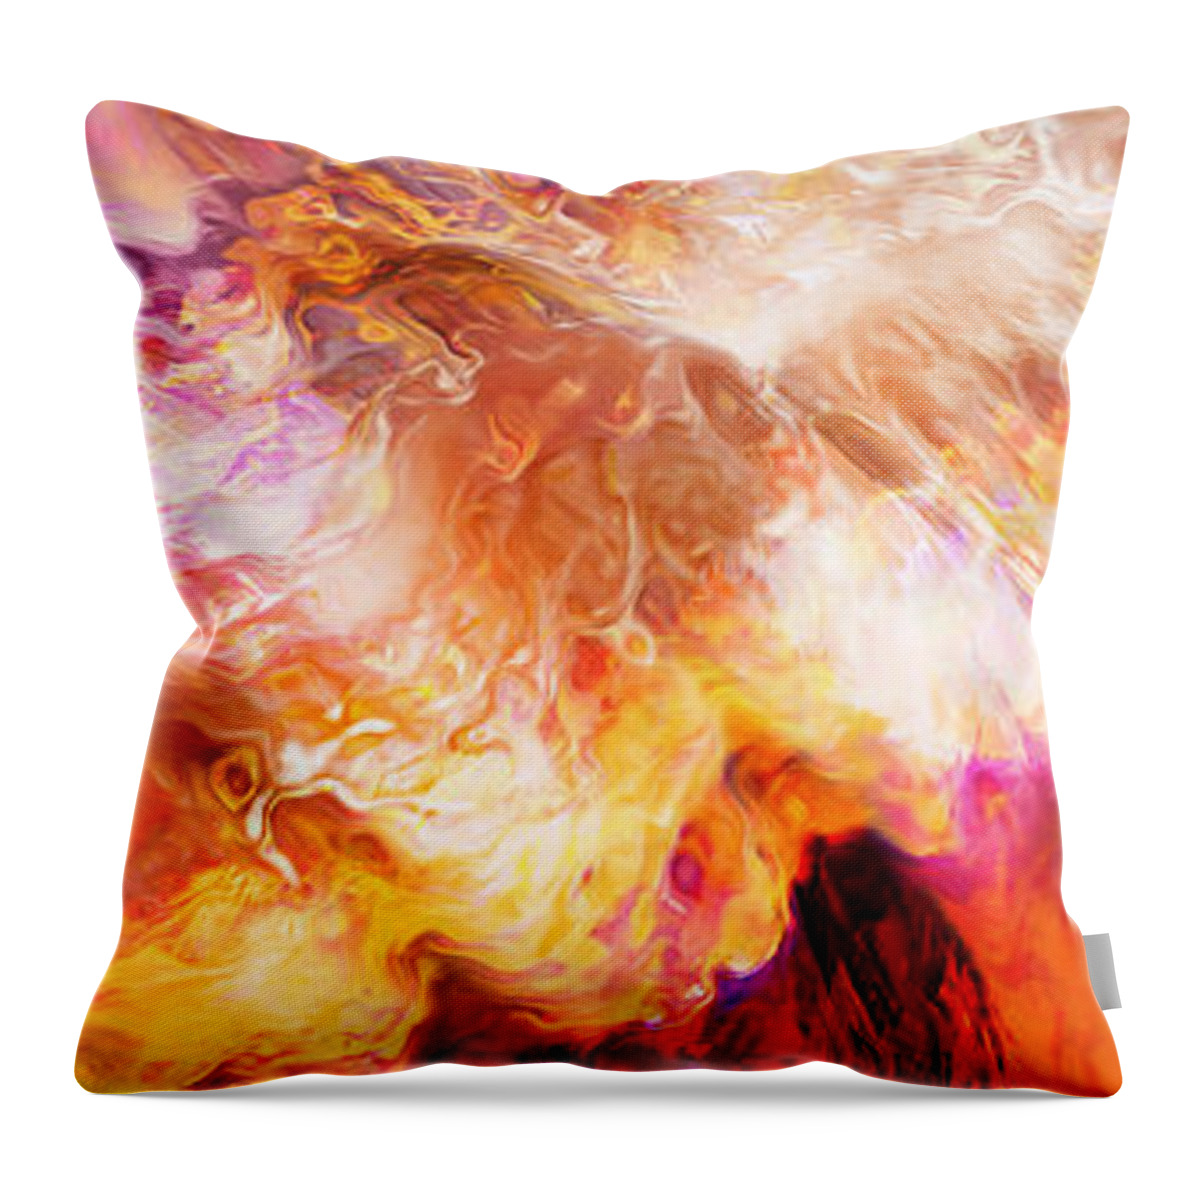 Abstract Art Throw Pillow featuring the painting Desire - Abstract Art by Jaison Cianelli